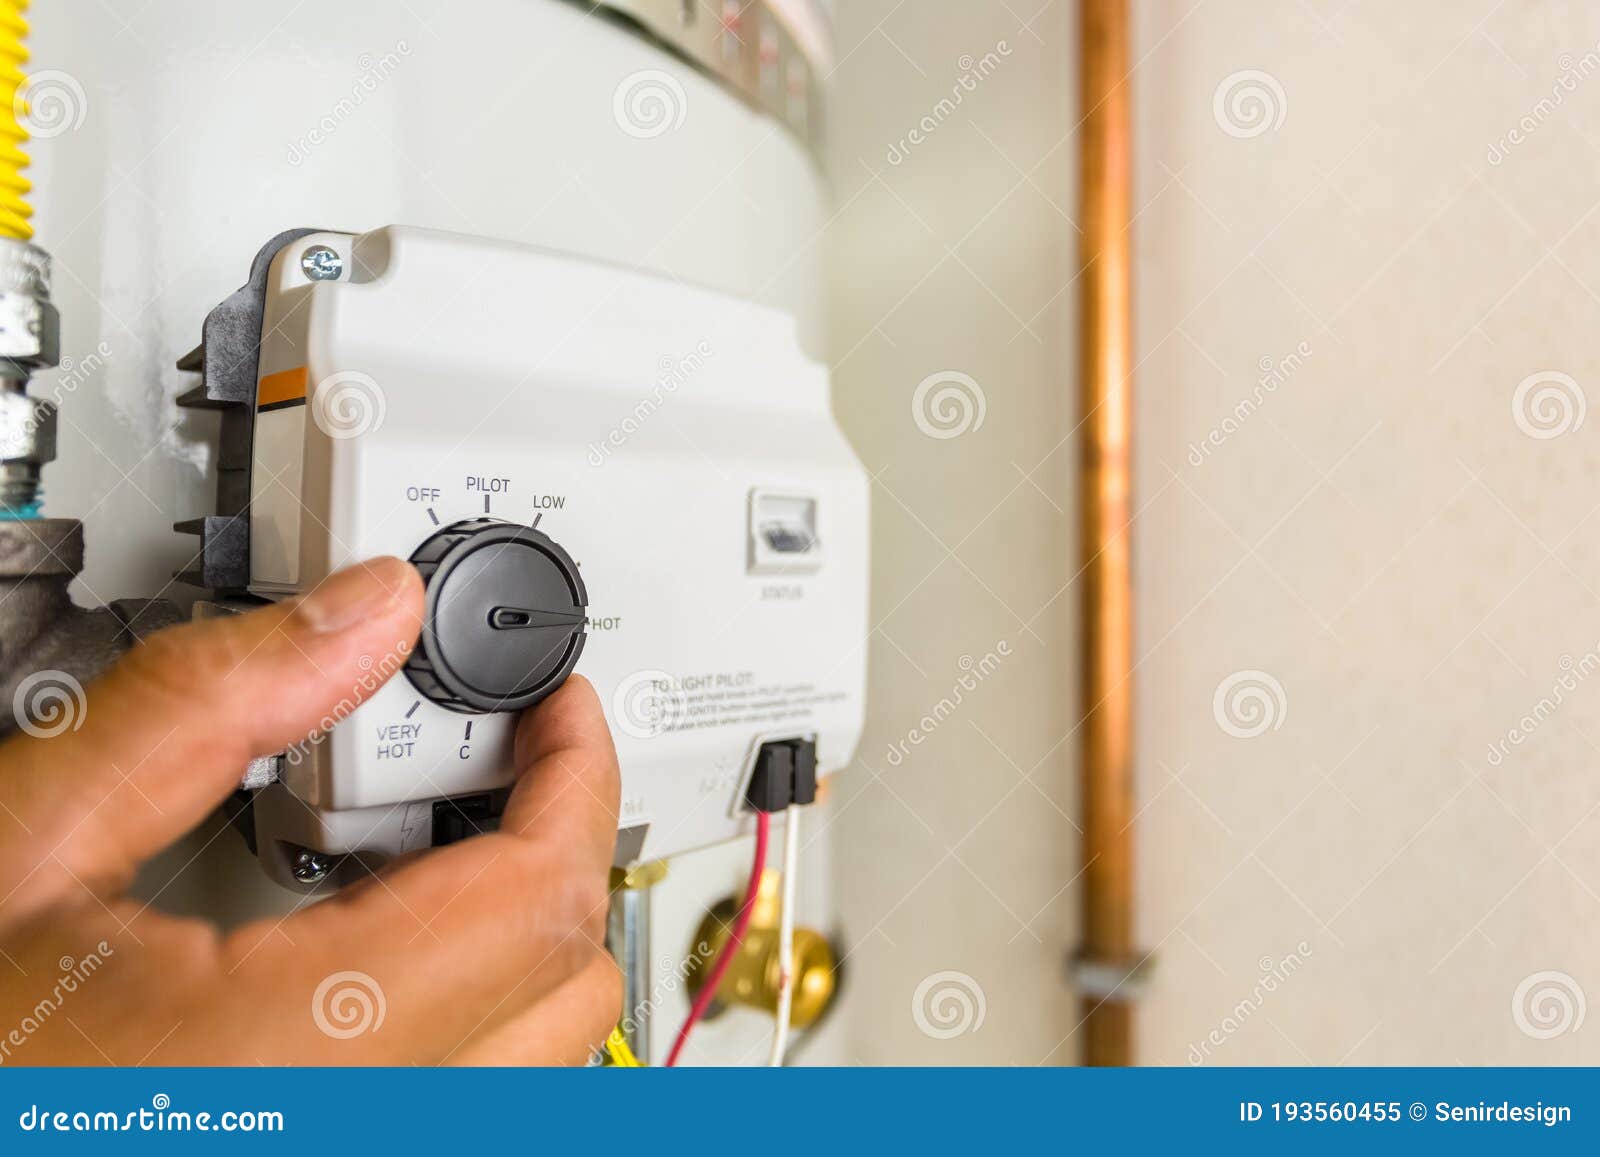 https://thumbs.dreamstime.com/z/hot-water-heater-control-thermostat-sd-close-up-shot-plumber-male-hand-adjusting-modern-hot-water-heater-control-thermostat-193560455.jpg